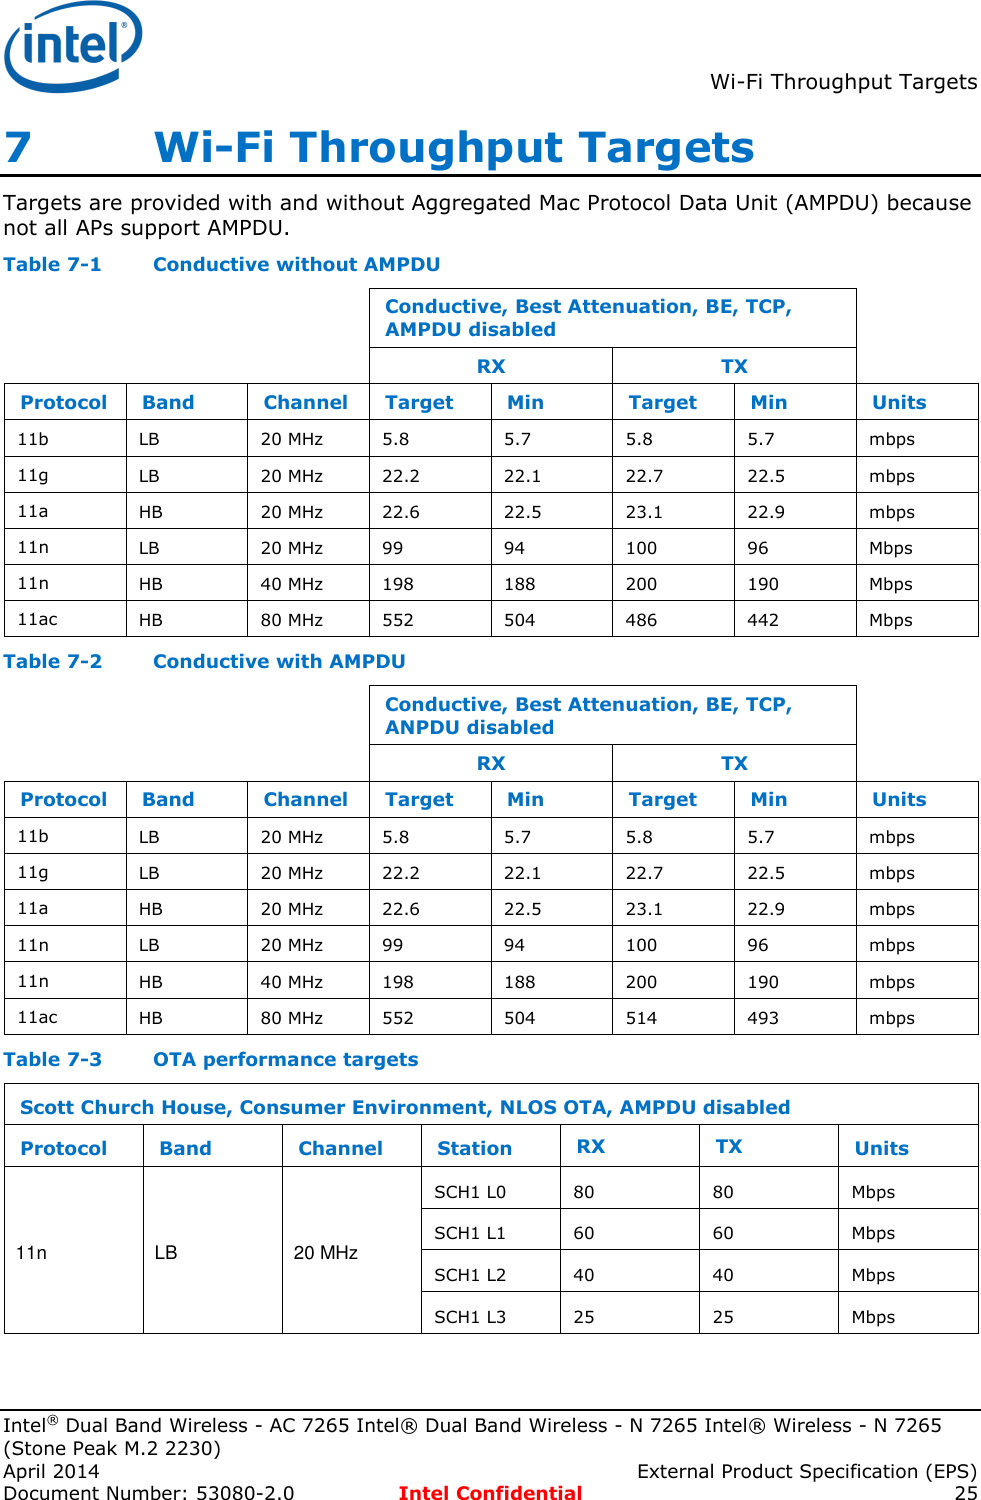  Wi-Fi Throughput Targets  Intel® Dual Band Wireless - AC 7265 Intel® Dual Band Wireless - N 7265 Intel® Wireless - N 7265 (Stone Peak M.2 2230) April 2014    External Product Specification (EPS) Document Number: 53080-2.0  Intel Confidential 25 7   Wi-Fi Throughput Targets Targets are provided with and without Aggregated Mac Protocol Data Unit (AMPDU) because not all APs support AMPDU. Table 7-1  Conductive without AMPDU    Conductive, Best Attenuation, BE, TCP, AMPDU disabled     RX TX  Protocol Band Channel Target Min Target Min Units 11b LB 20 MHz 5.8 5.7 5.8 5.7 mbps 11g LB 20 MHz 22.2 22.1 22.7 22.5 mbps 11a HB 20 MHz 22.6 22.5 23.1 22.9 mbps 11n LB 20 MHz 99 94 100 96 Mbps 11n HB 40 MHz 198 188 200 190 Mbps 11ac HB 80 MHz 552 504 486 442 Mbps Table 7-2  Conductive with AMPDU    Conductive, Best Attenuation, BE, TCP, ANPDU disabled     RX TX  Protocol Band Channel Target Min Target Min Units 11b LB 20 MHz 5.8 5.7 5.8 5.7 mbps 11g LB 20 MHz 22.2 22.1 22.7 22.5 mbps 11a HB 20 MHz 22.6 22.5 23.1 22.9 mbps 11n LB 20 MHz 99 94 100 96 mbps 11n HB 40 MHz 198 188 200 190 mbps 11ac HB 80 MHz 552 504 514 493 mbps Table 7-3  OTA performance targets Scott Church House, Consumer Environment, NLOS OTA, AMPDU disabled Protocol Band Channel Station RX TX Units 11n LB 20 MHz SCH1 L0 80 80 Mbps SCH1 L1 60 60 Mbps SCH1 L2 40 40 Mbps SCH1 L3 25 25 Mbps    